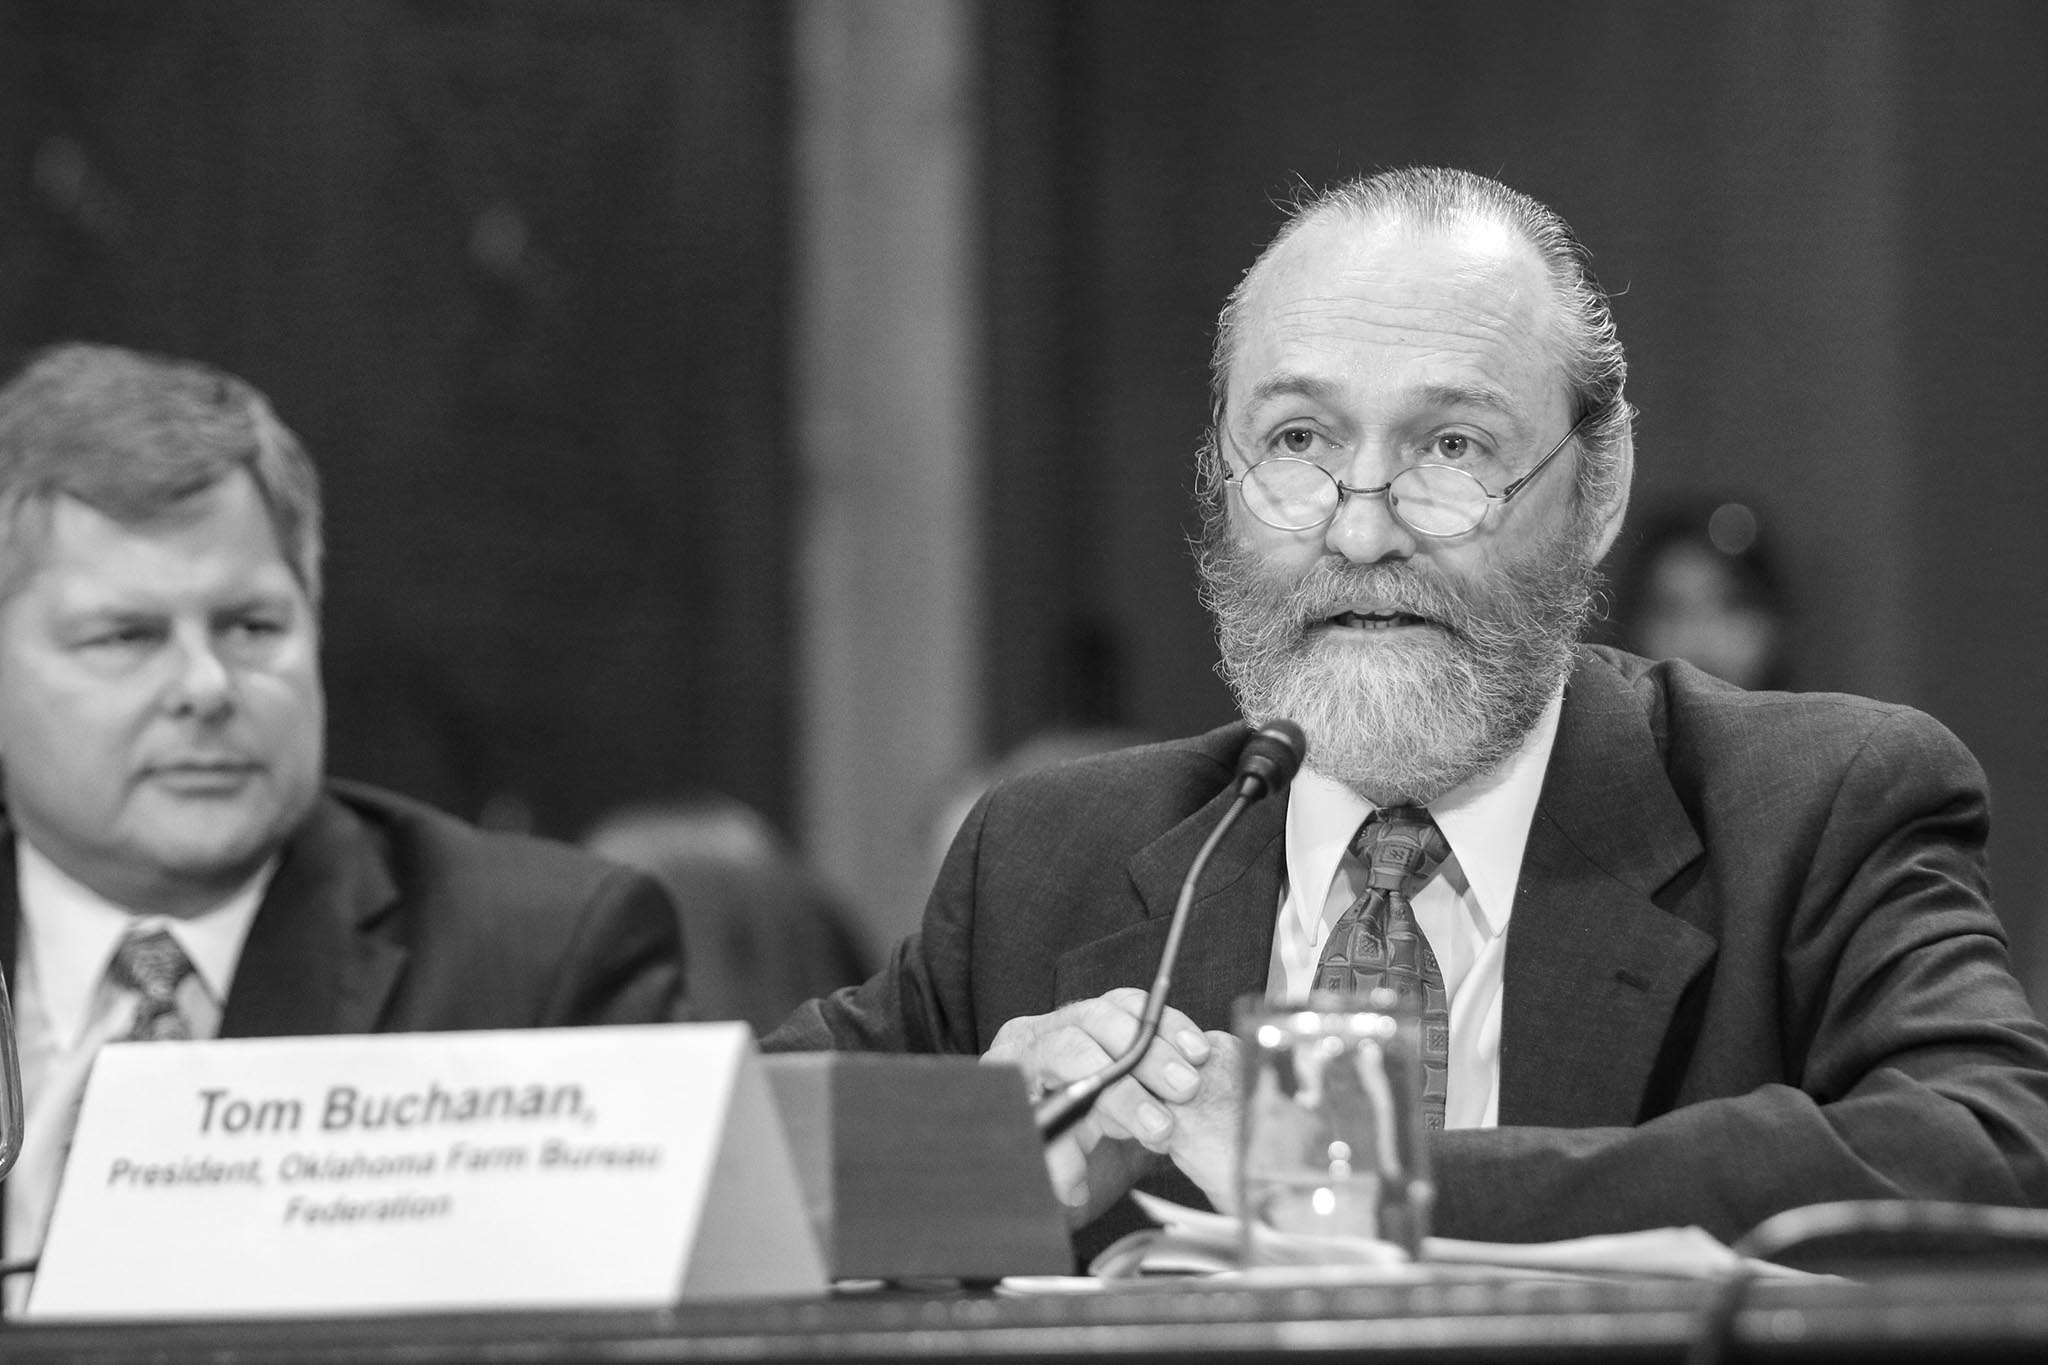 Oklahoma Farm Bureau President Tom Buchanan testifies before the U.S. Senate Environment and Public Works Subcommittee on Superfund, Waste Management and Regulatory Oversight on April 12, 2016, about the proposed Waters of the United States rules change to the Clean Water Act.